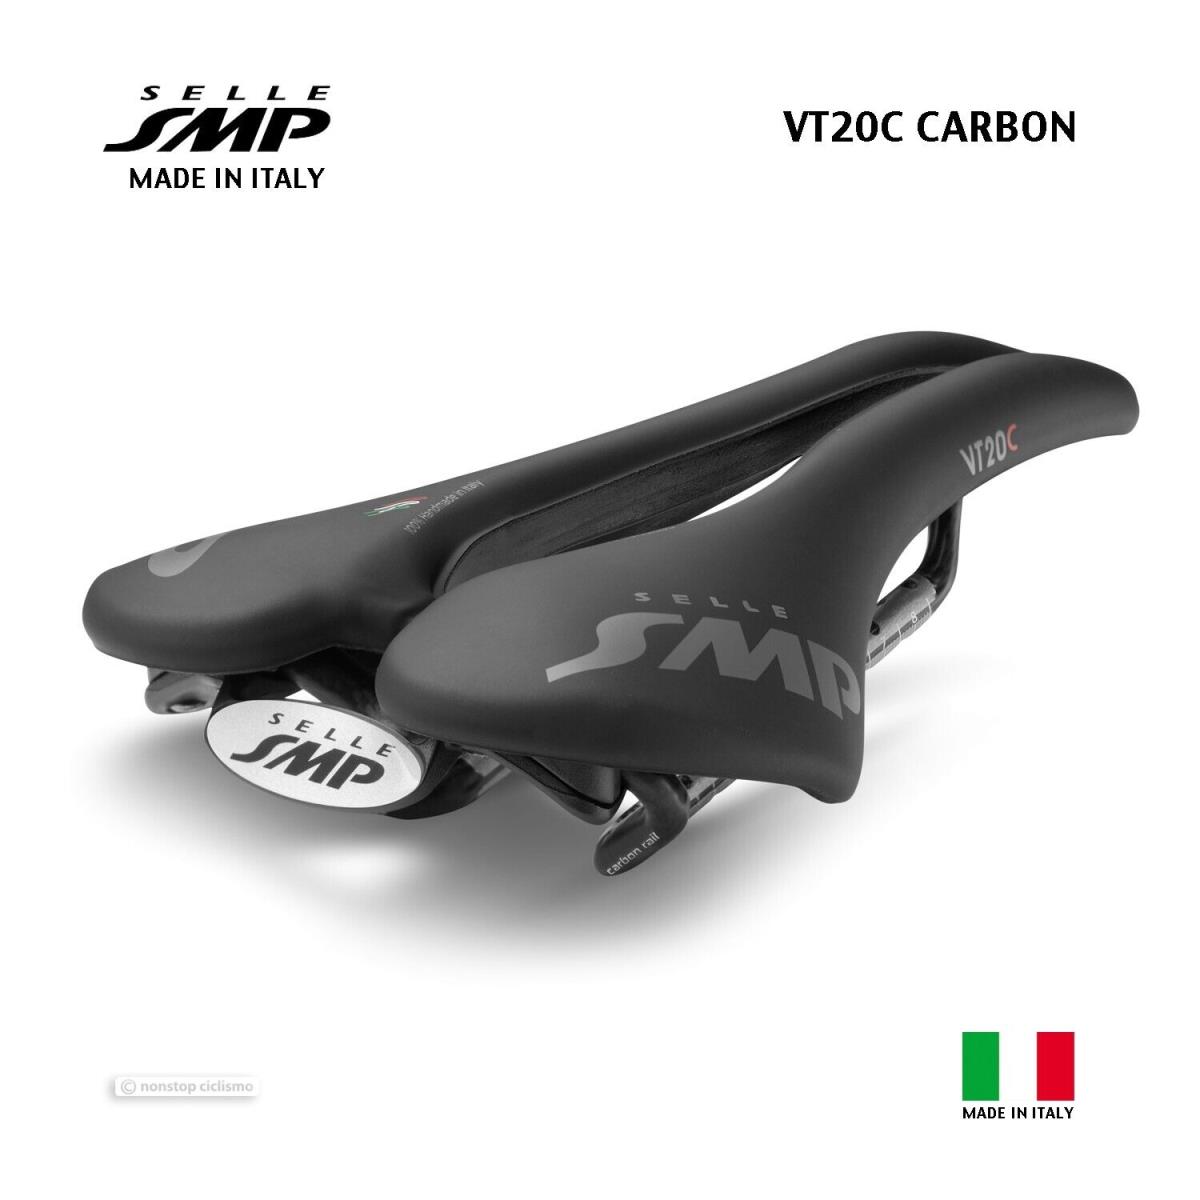 2023 Selle Smp VT20C Carbon Saddle : Velvet Touch Black - Made IN Italy